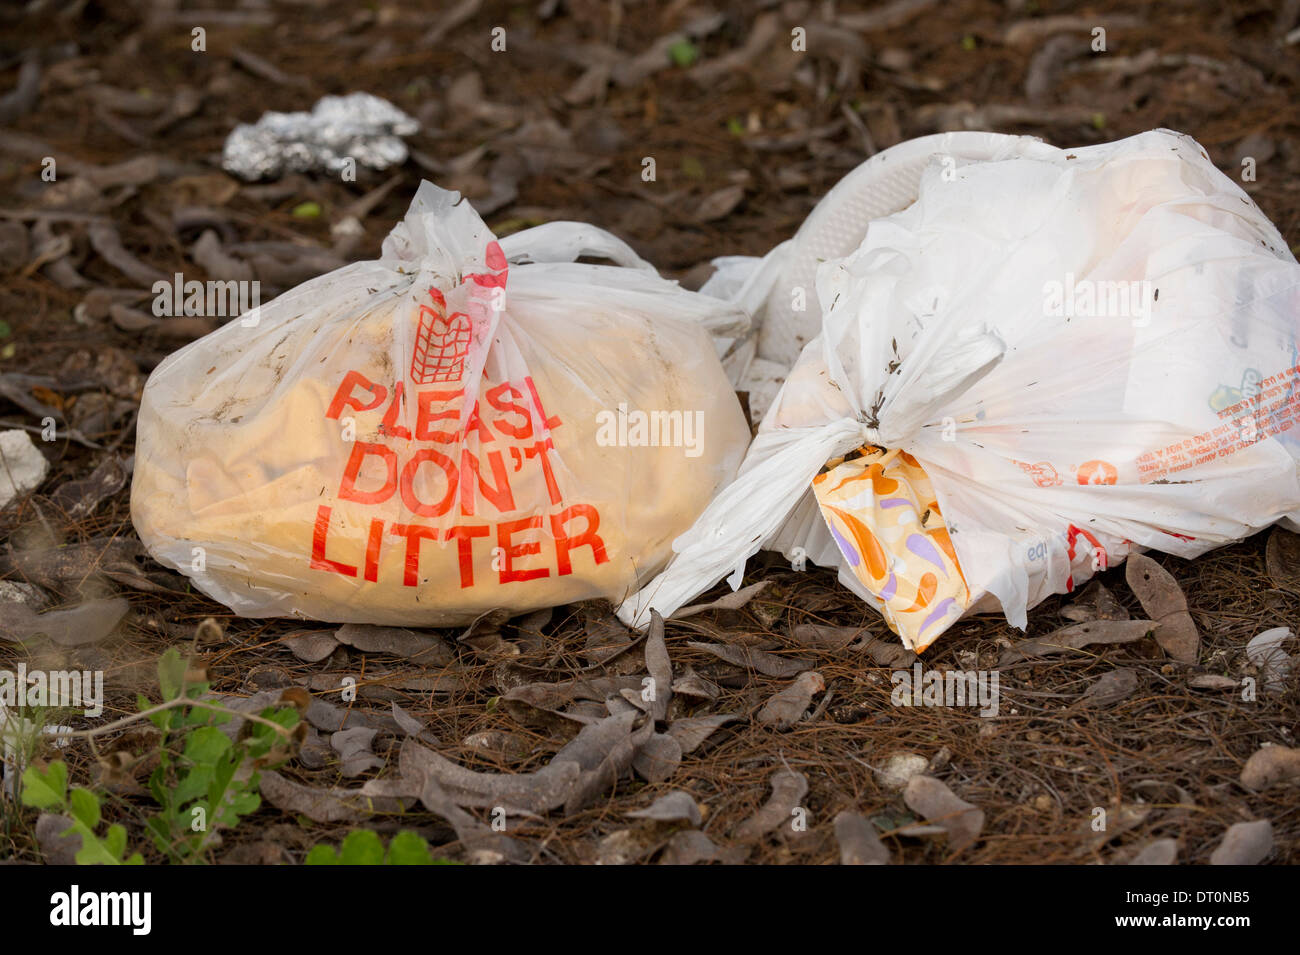 'Please don't litter' plastic bags filled with trash on ground at a rest stop in rural south Texas. Stock Photo